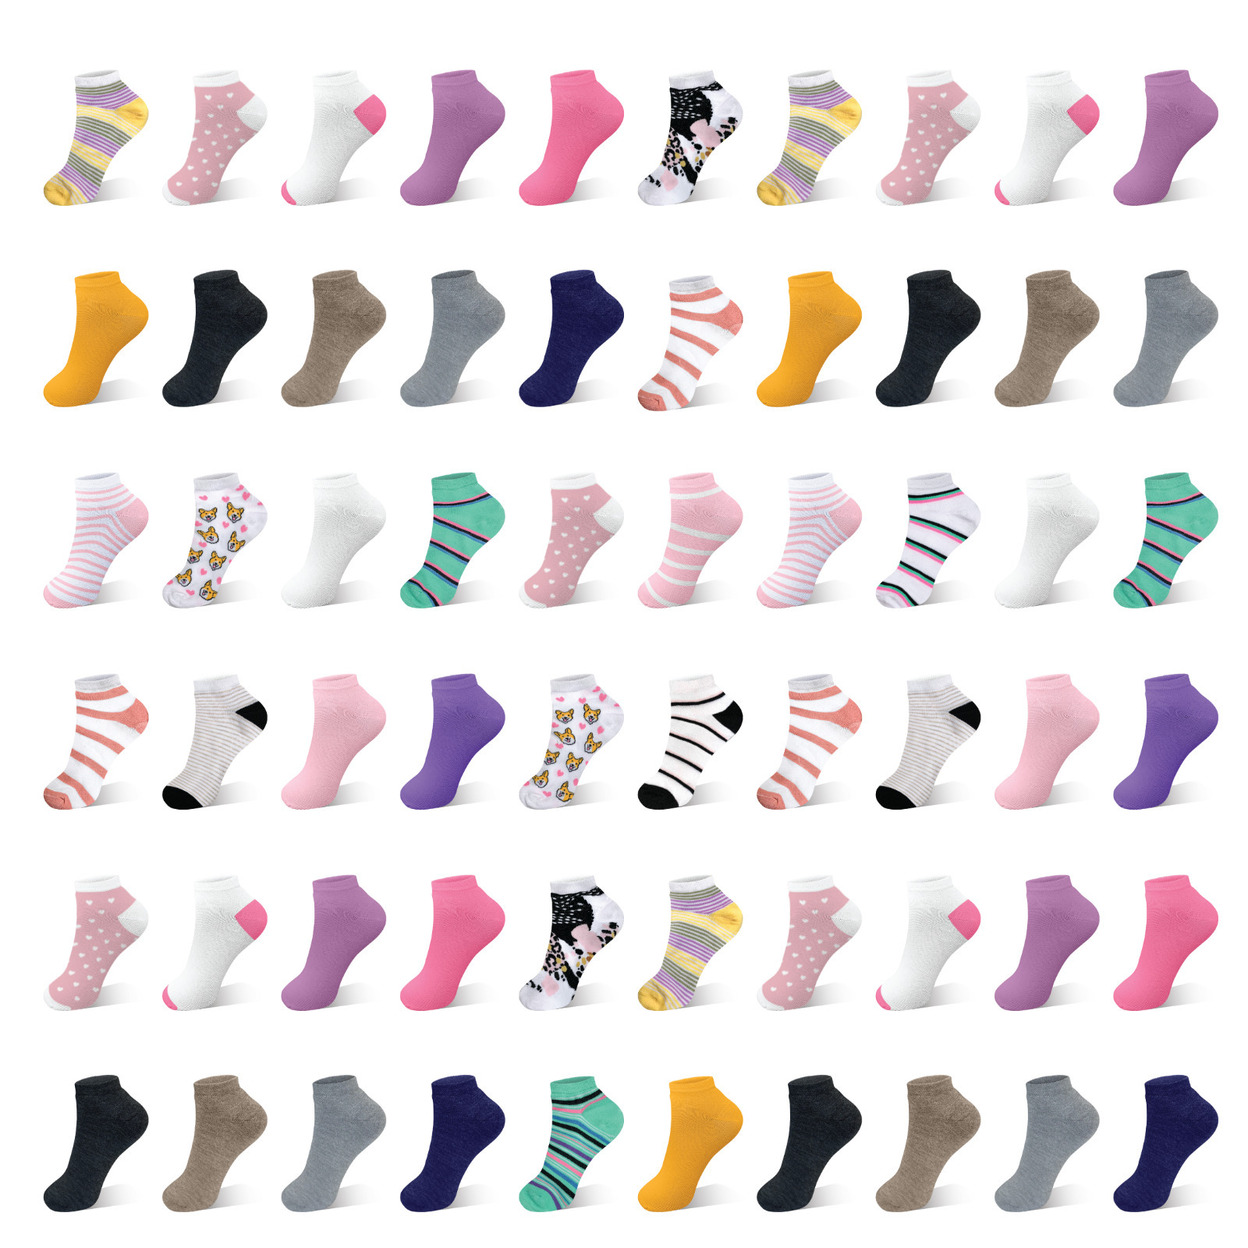 50-Pairs: Women’s Breathable Fun-Funky Colorful No Show Low Cut Ankle Socks